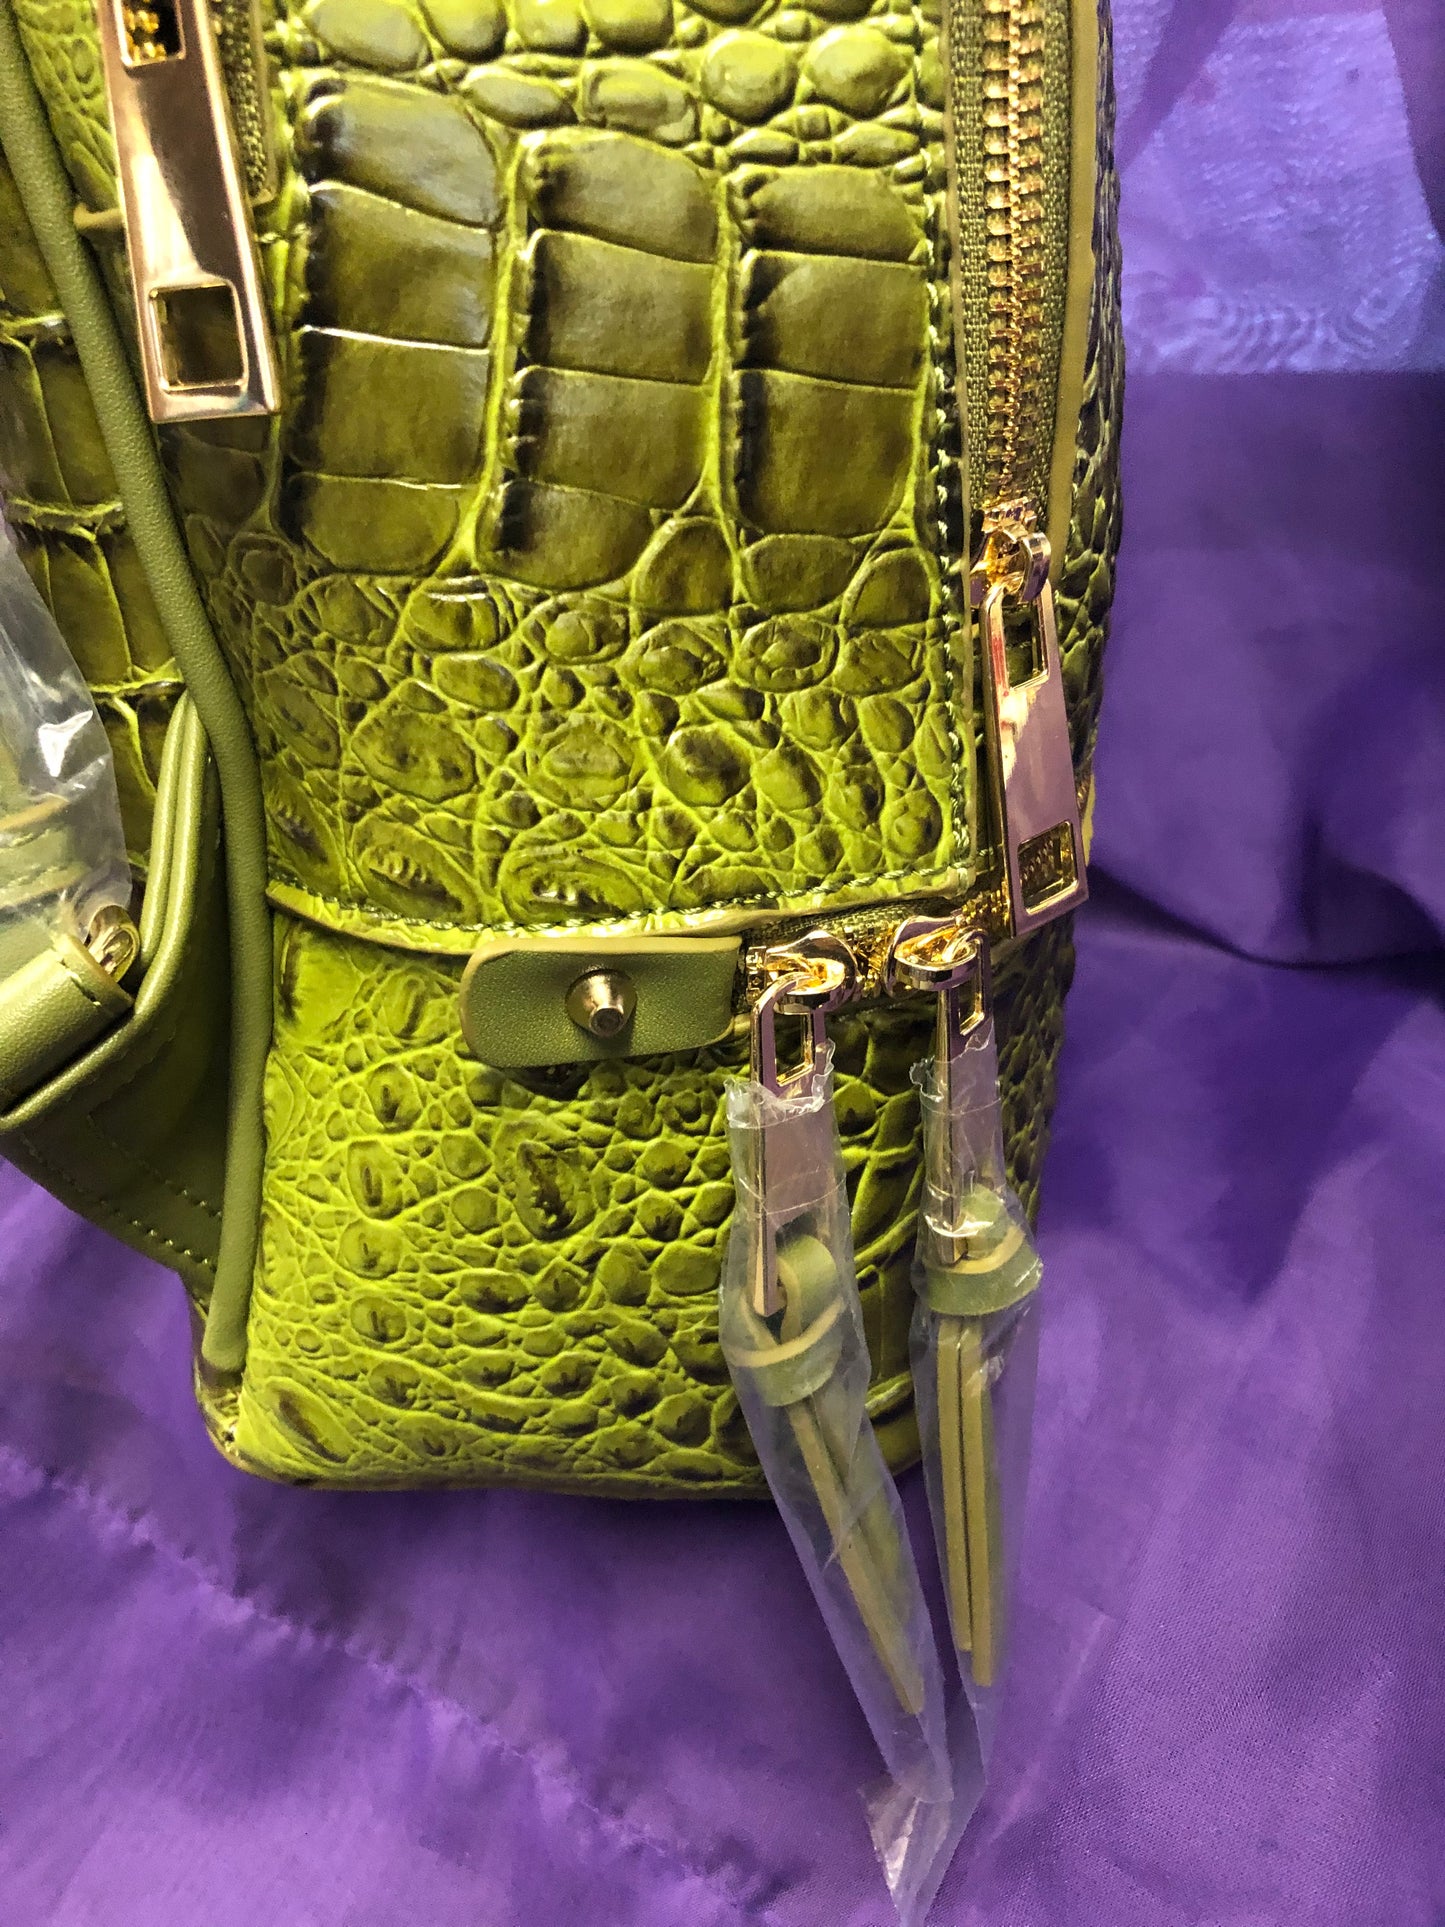 Woman Double Zip Fashion  Chic Croc Backpack With Wallet Color Pea Green "New Arrival" "CATCH THE SALE GOING ON NOW" Make A Great Graduation Gift"